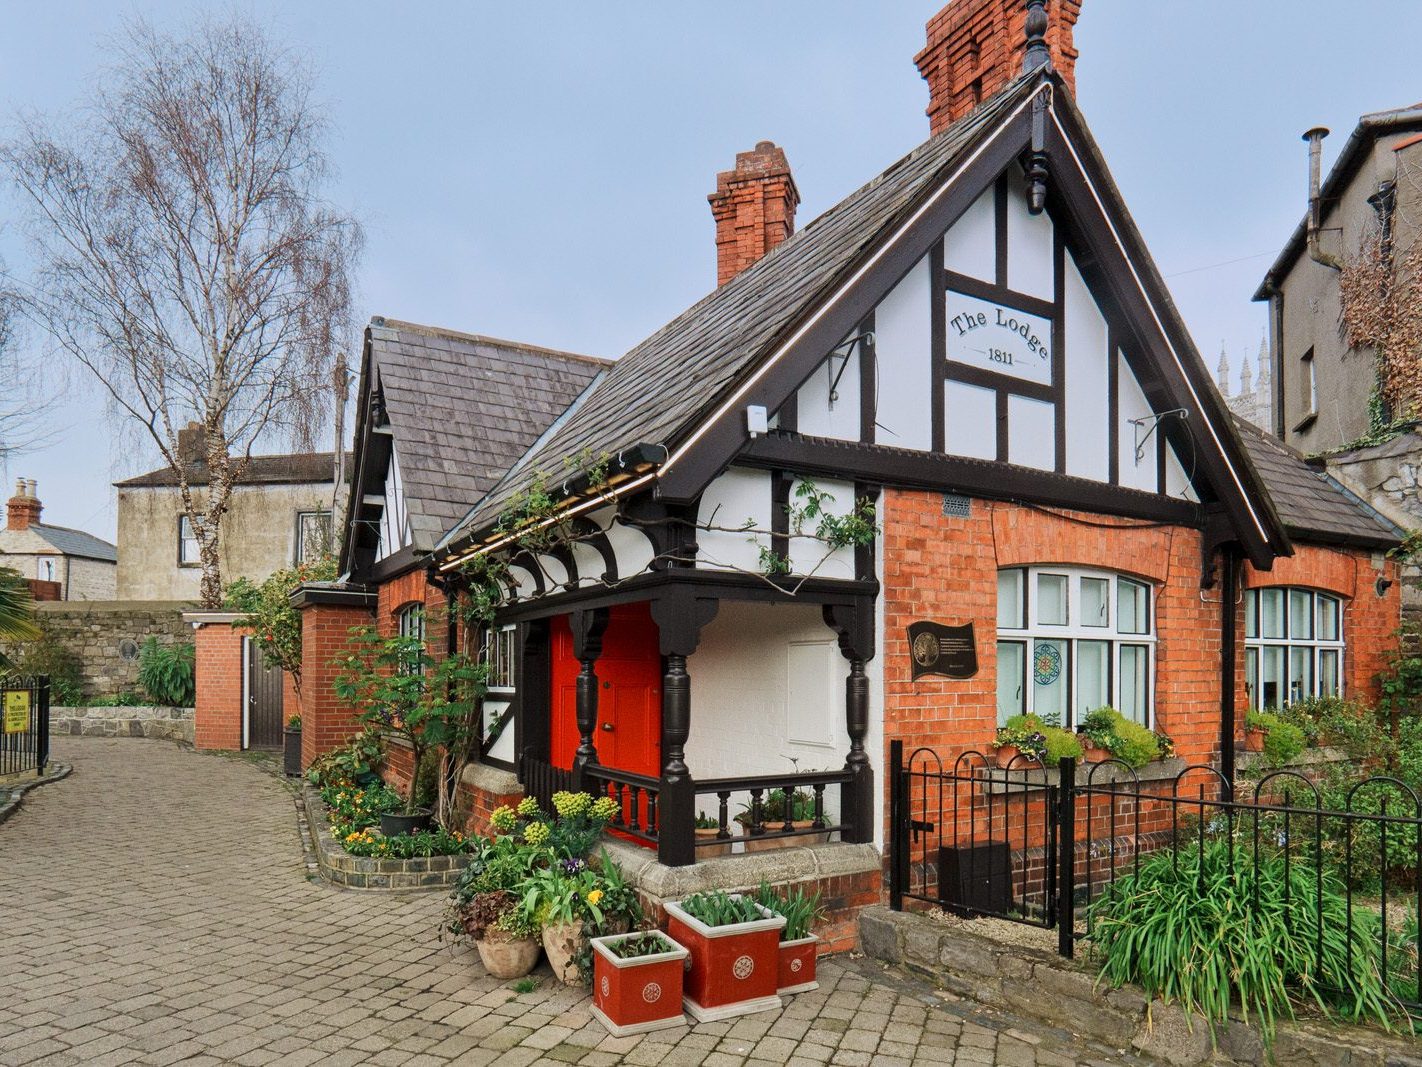 BLESSINGTON STREET BASIN [A SECRET RETREAT WITHIN A VERY BUSY PART OF THE CITY-229347-1